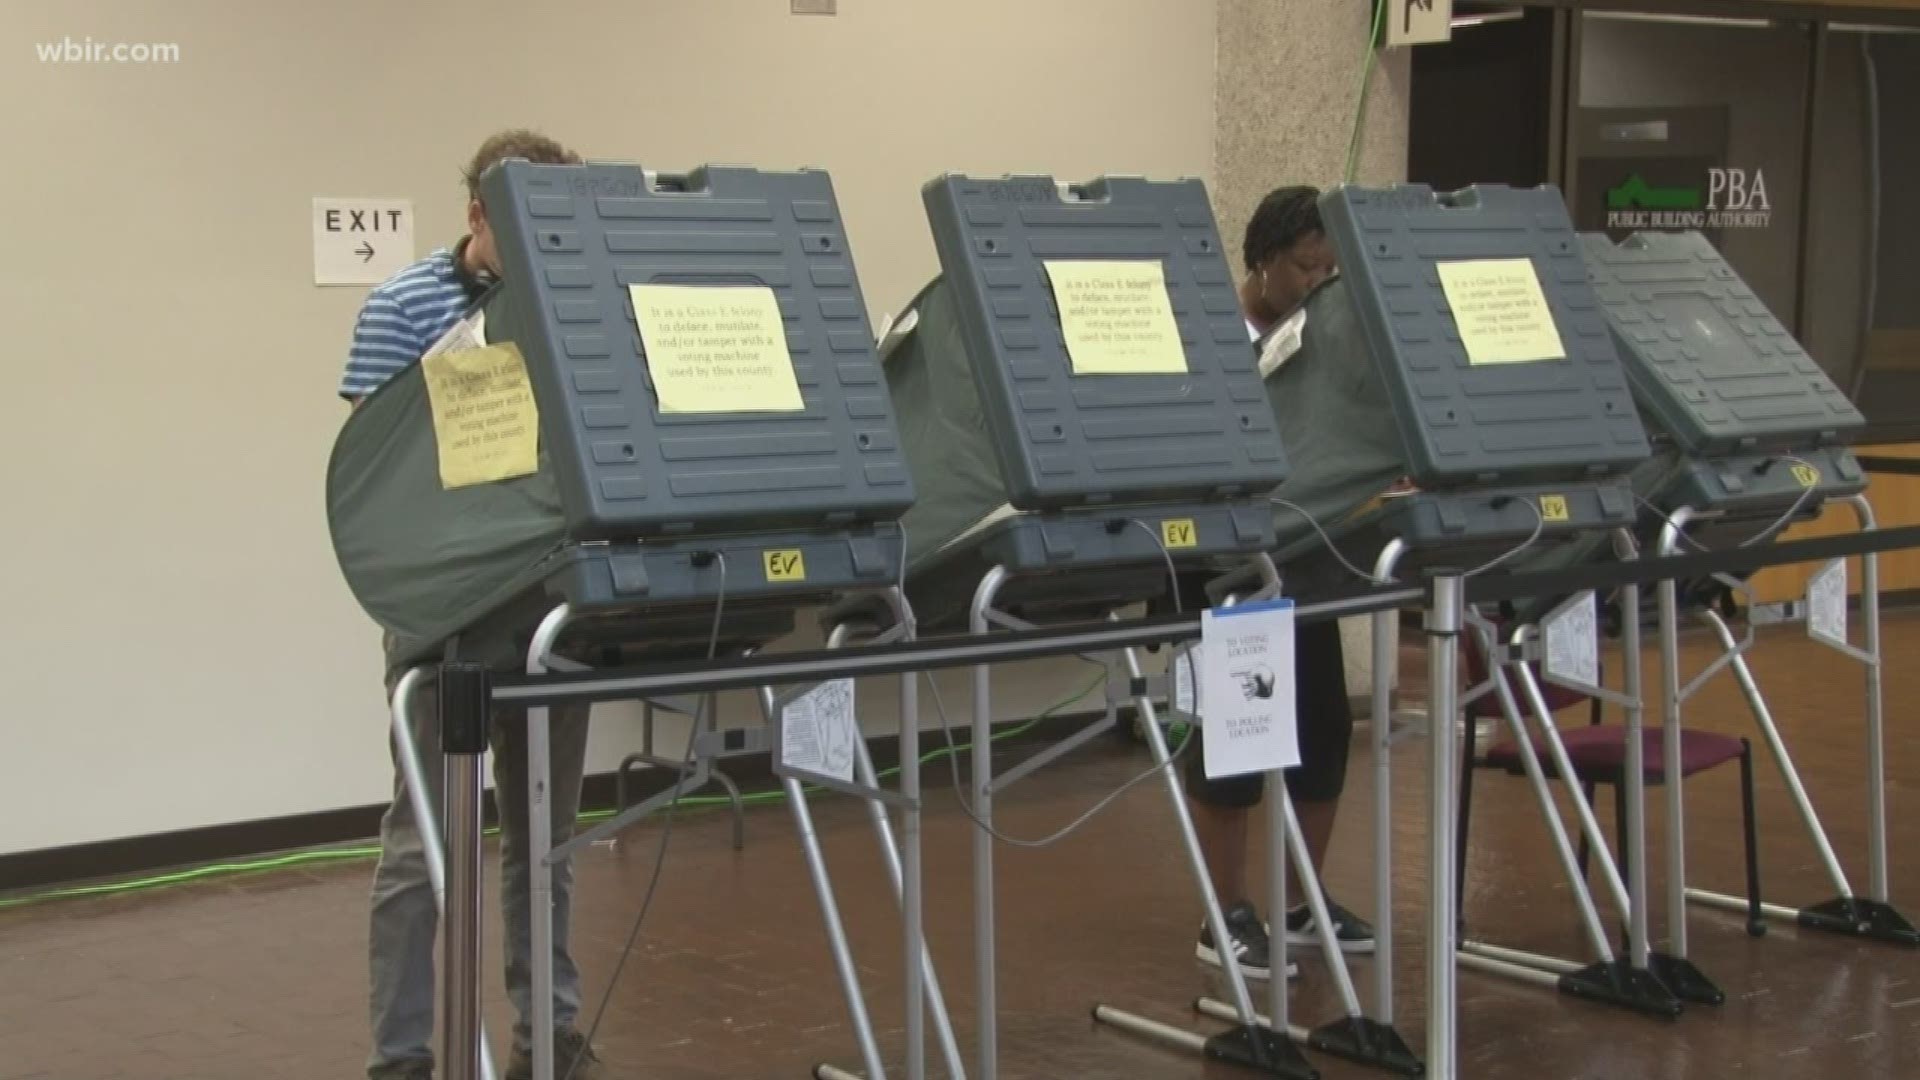 Election officials say they are hoping for 10 thousand voters before Thursday and another 10 thousand on election day.